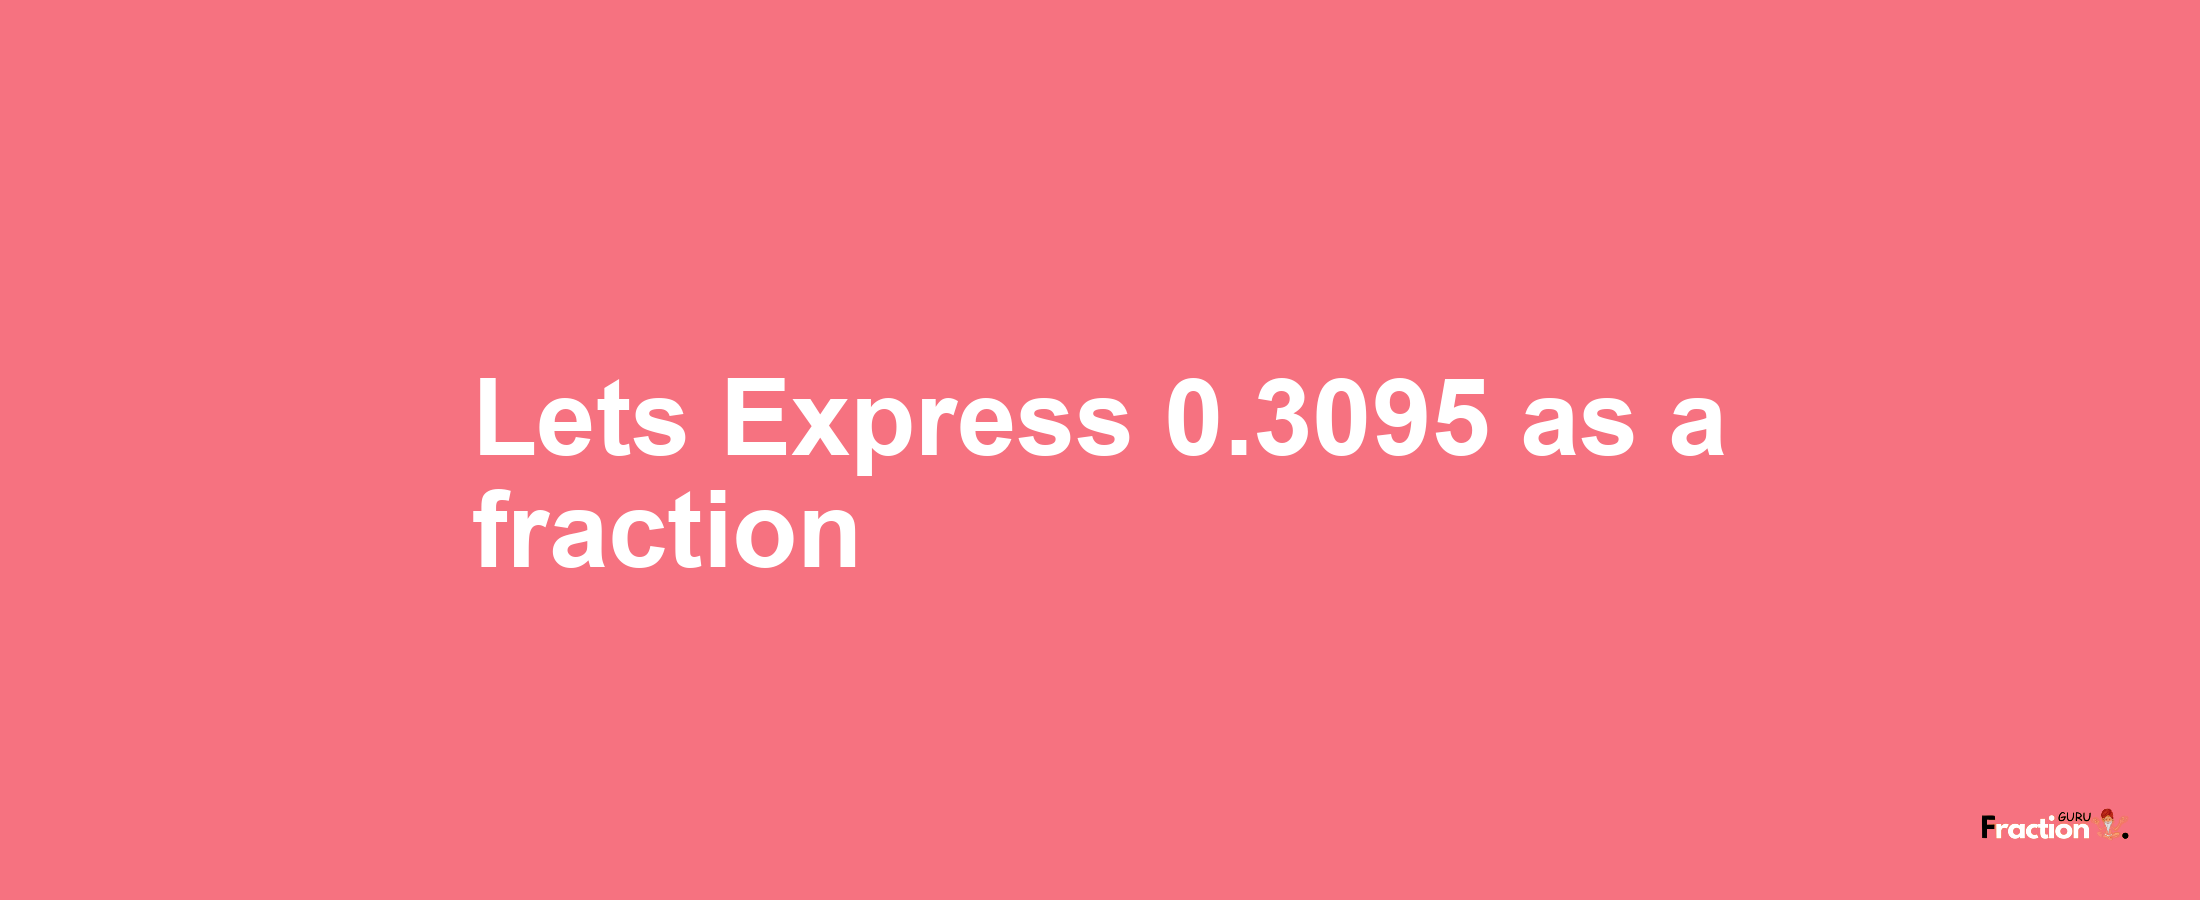 Lets Express 0.3095 as afraction